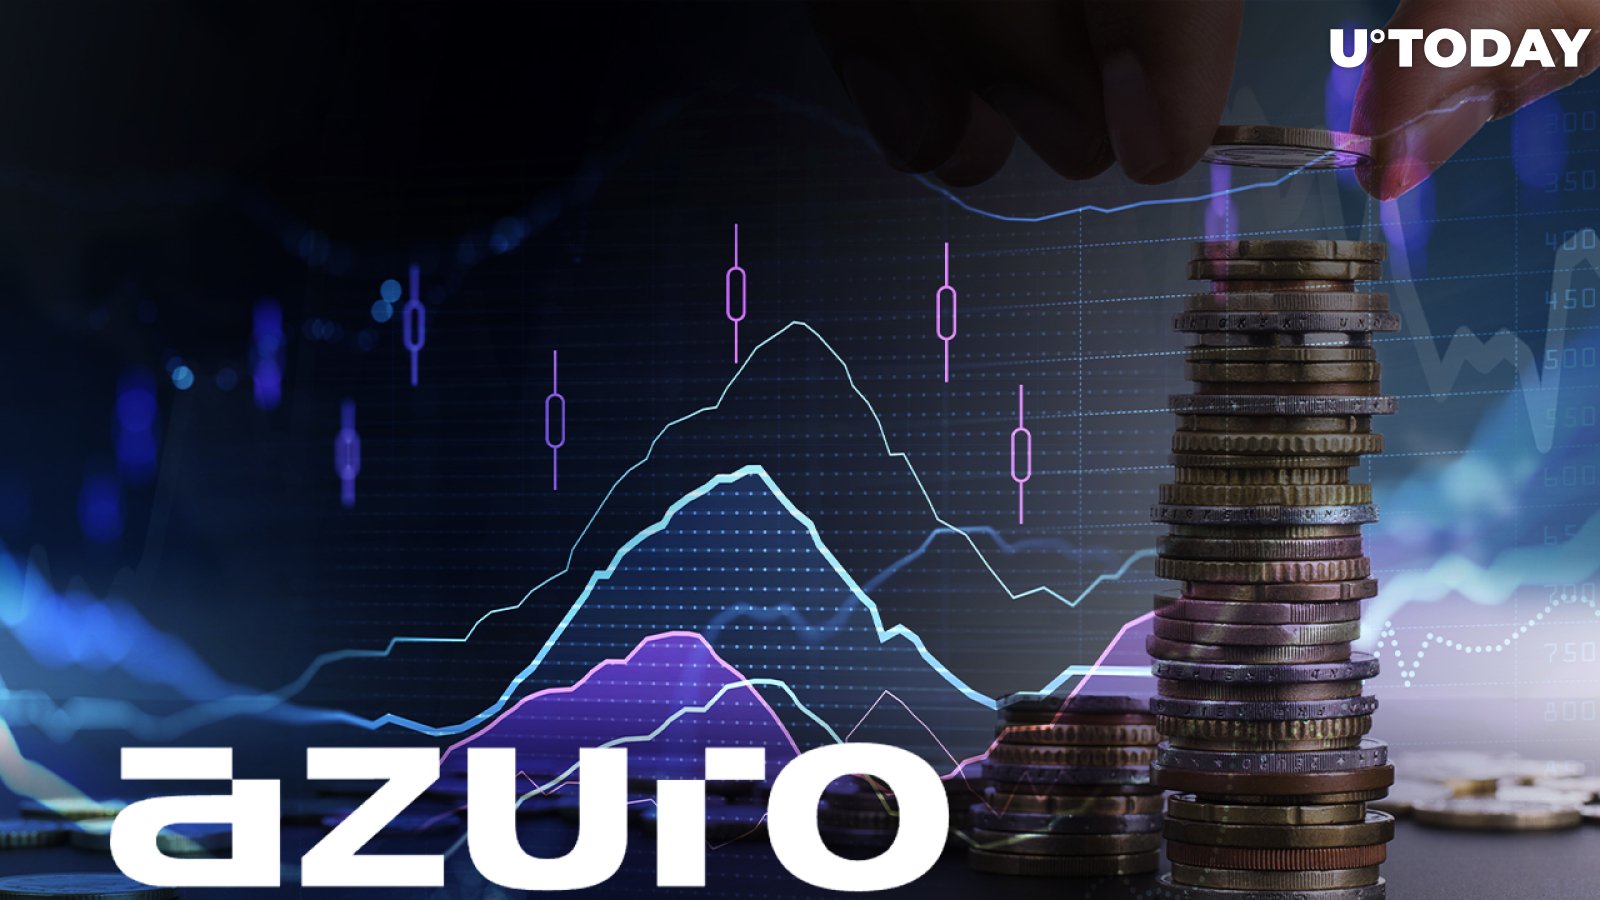 Azuro Successfully Closes $3.5 Million Seed Investment Round 